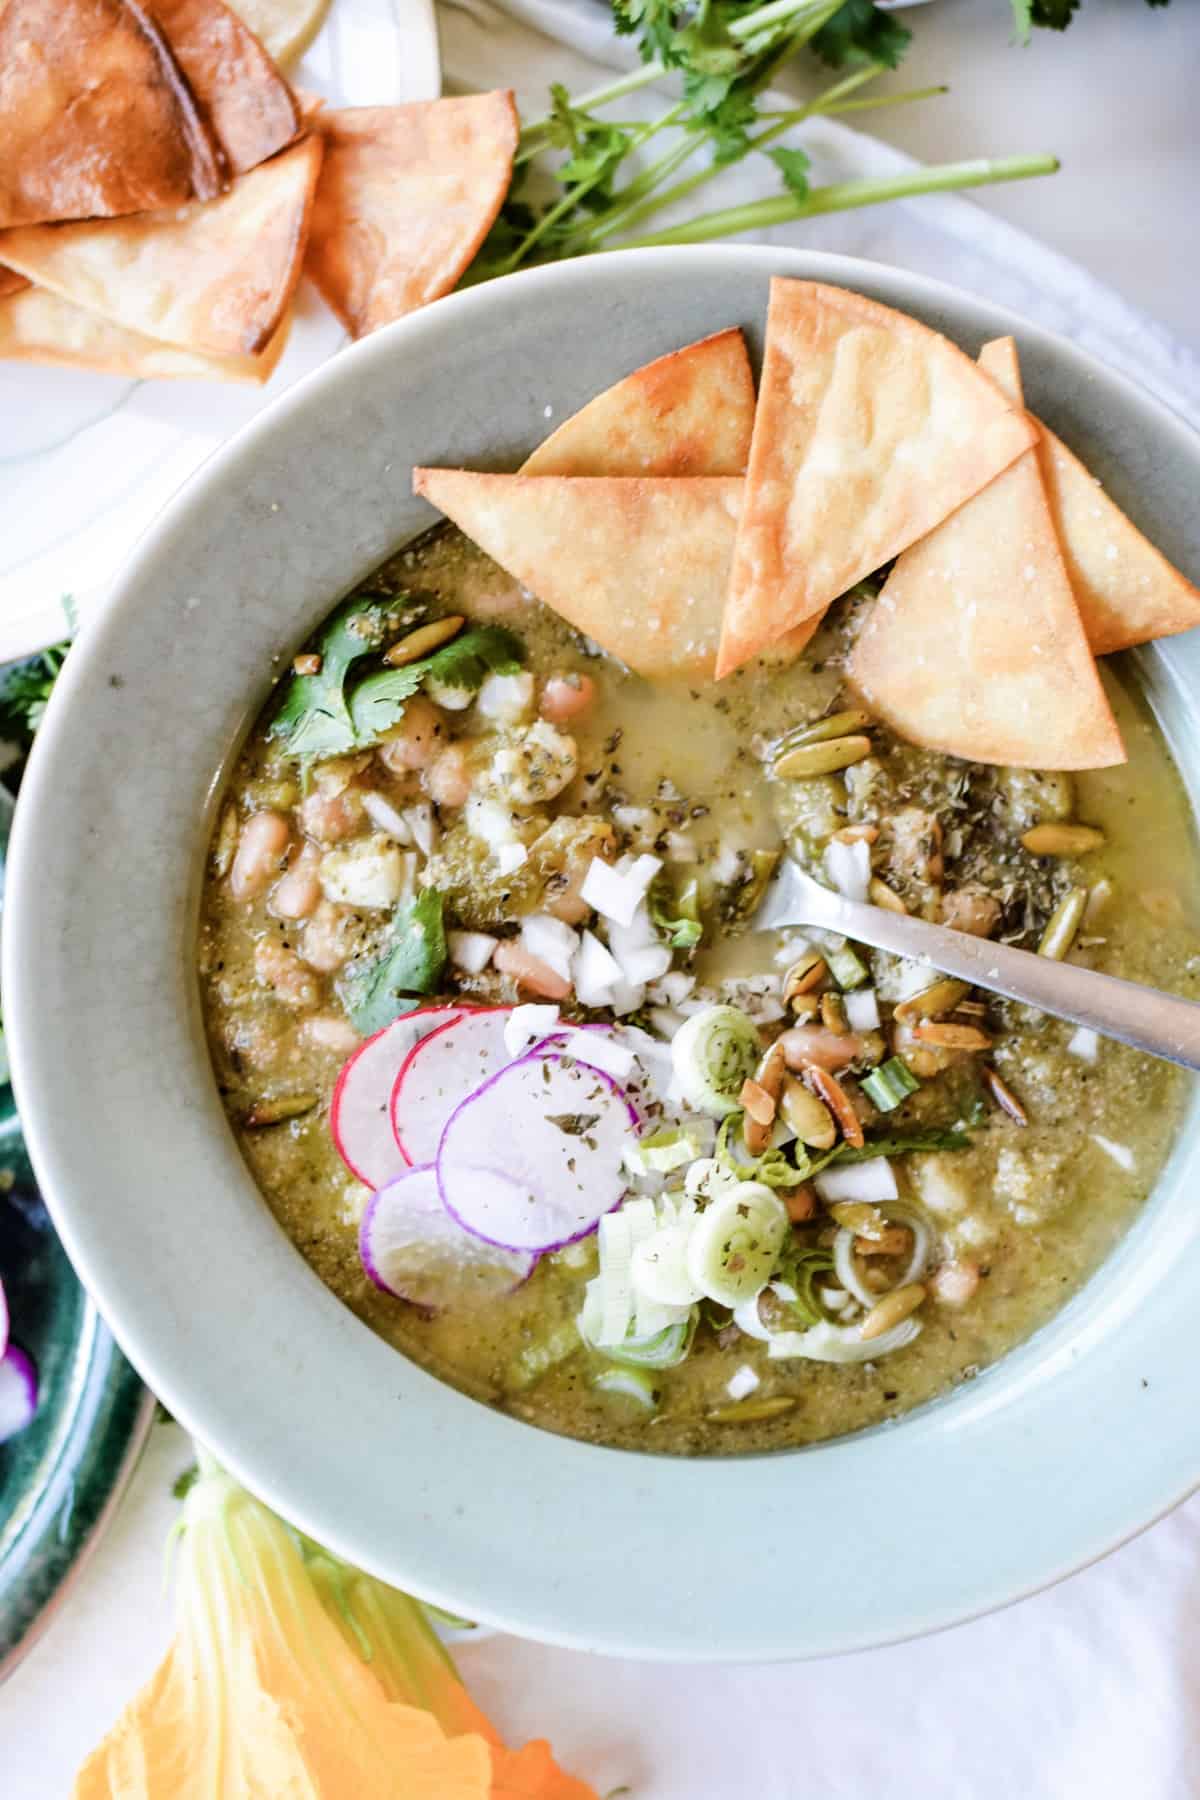 A spicy Pozole Verde that just so happens to be vegan. Made with green chiles, jalapeños, pinto beans and hominy. One of my favorite Mexican dinner ideas! #sponsored #holajalapeno #pozole #vegan